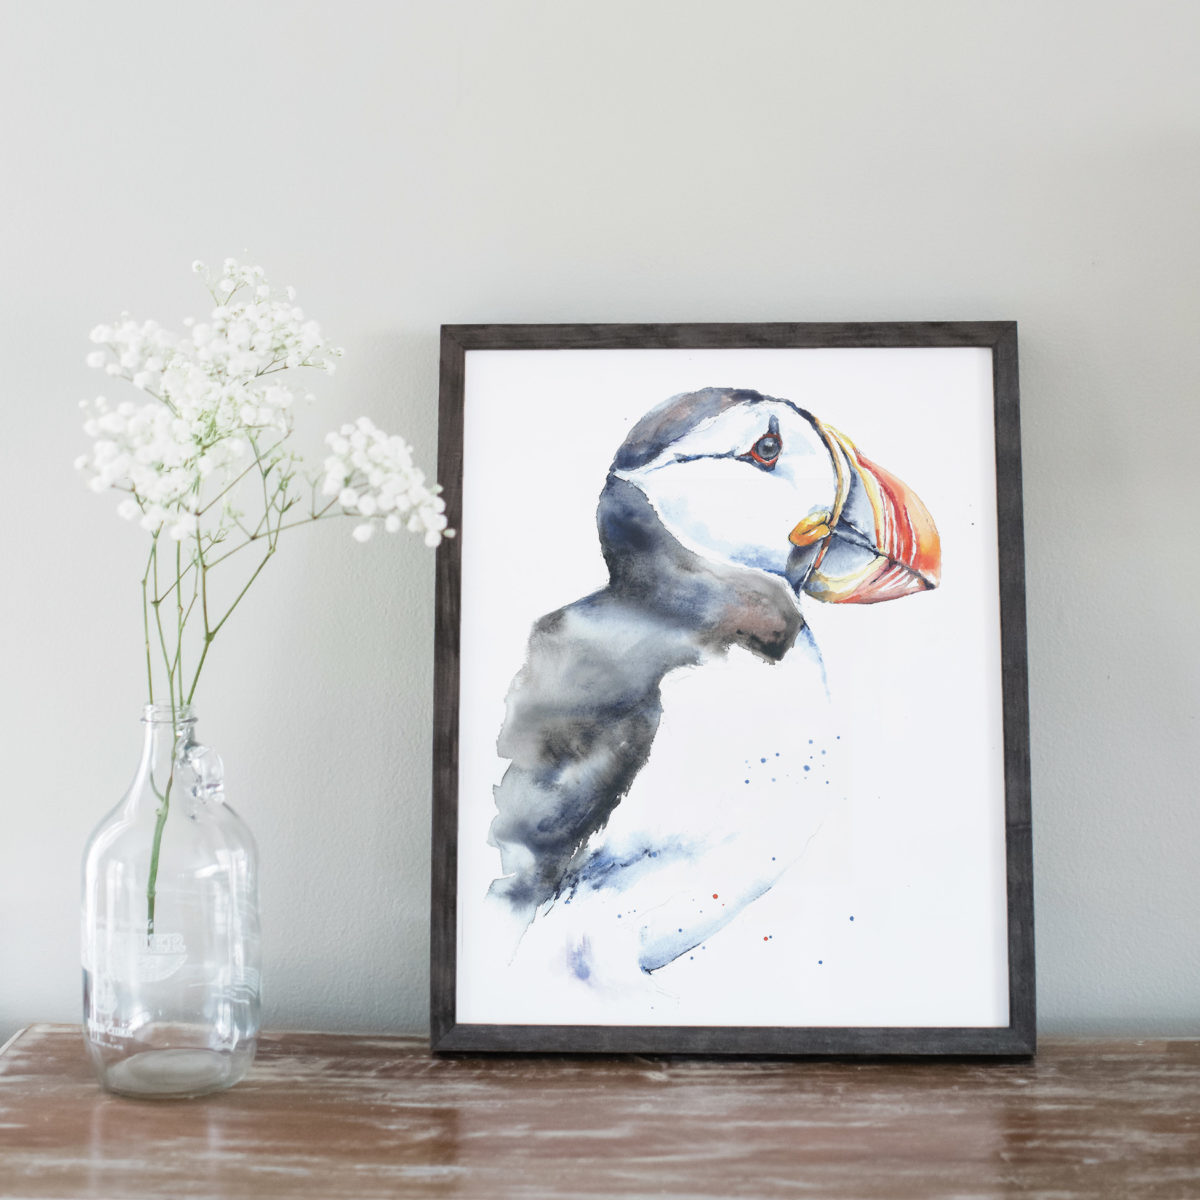 Watercolor of puffin in gray frame with flowers on left